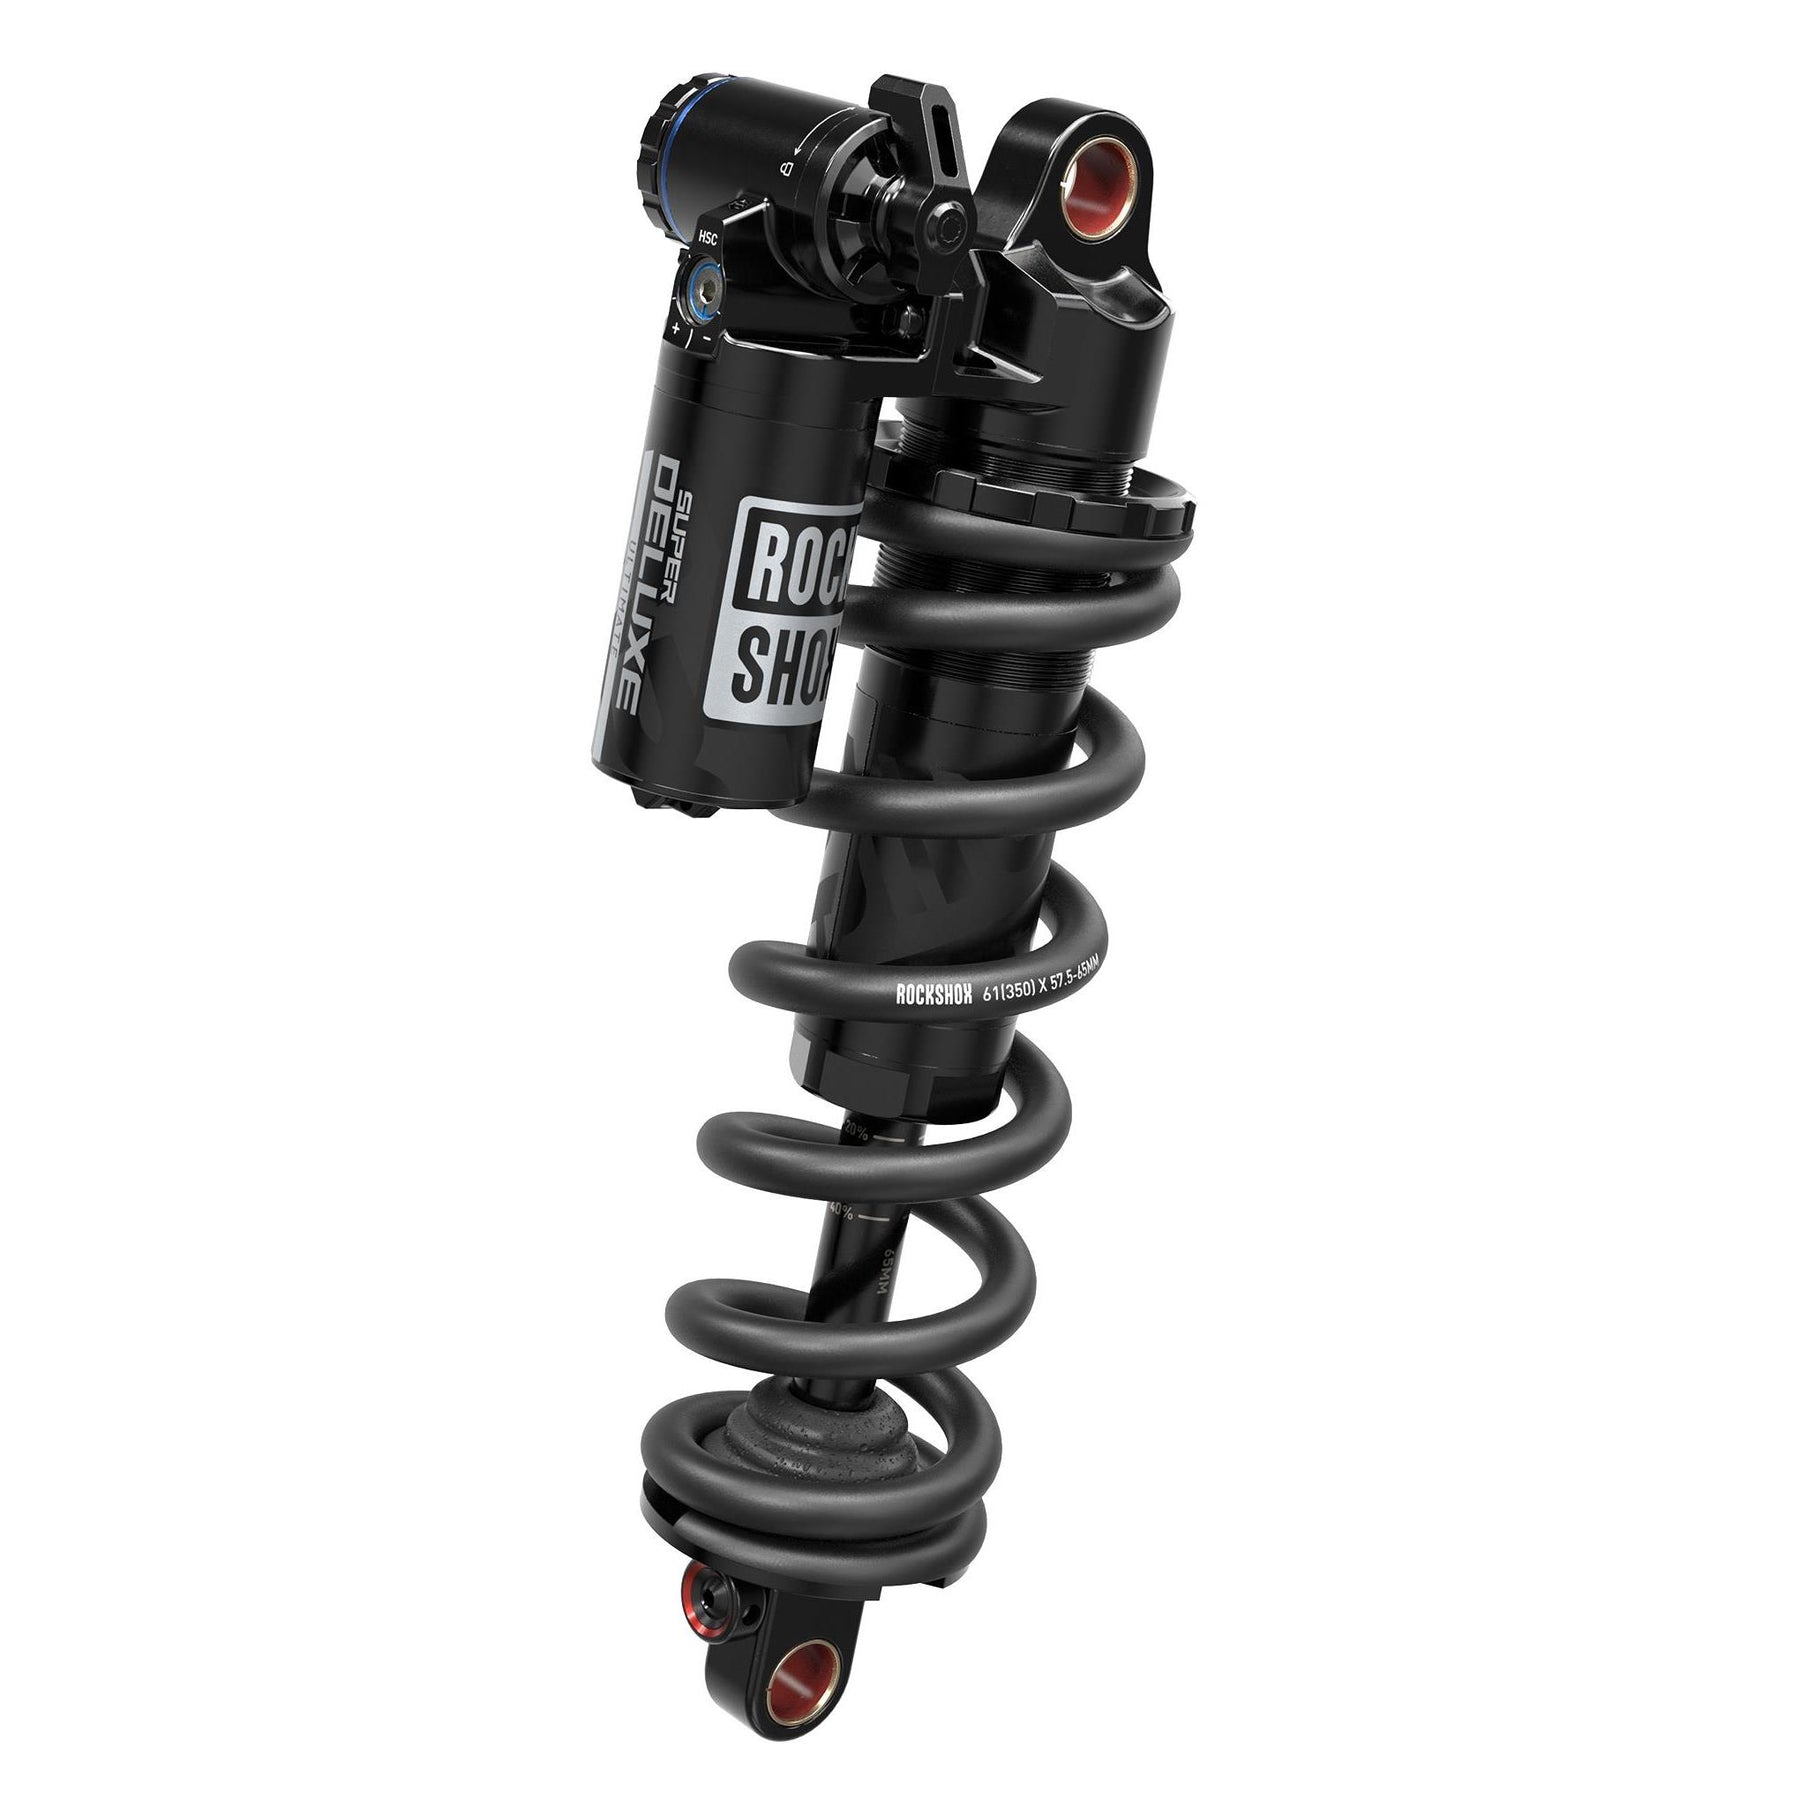 Rockshox Super Deluxe Coil Ultimate Rear Shock RC2T - Linearreb/Lcomp, 320LB Lockout, Hydraulic Bottom Out, Standard Standard(8X30,8X25) (Spring Sold Separate) B1 Transition Smuggler 2018-2020 Black 210X50